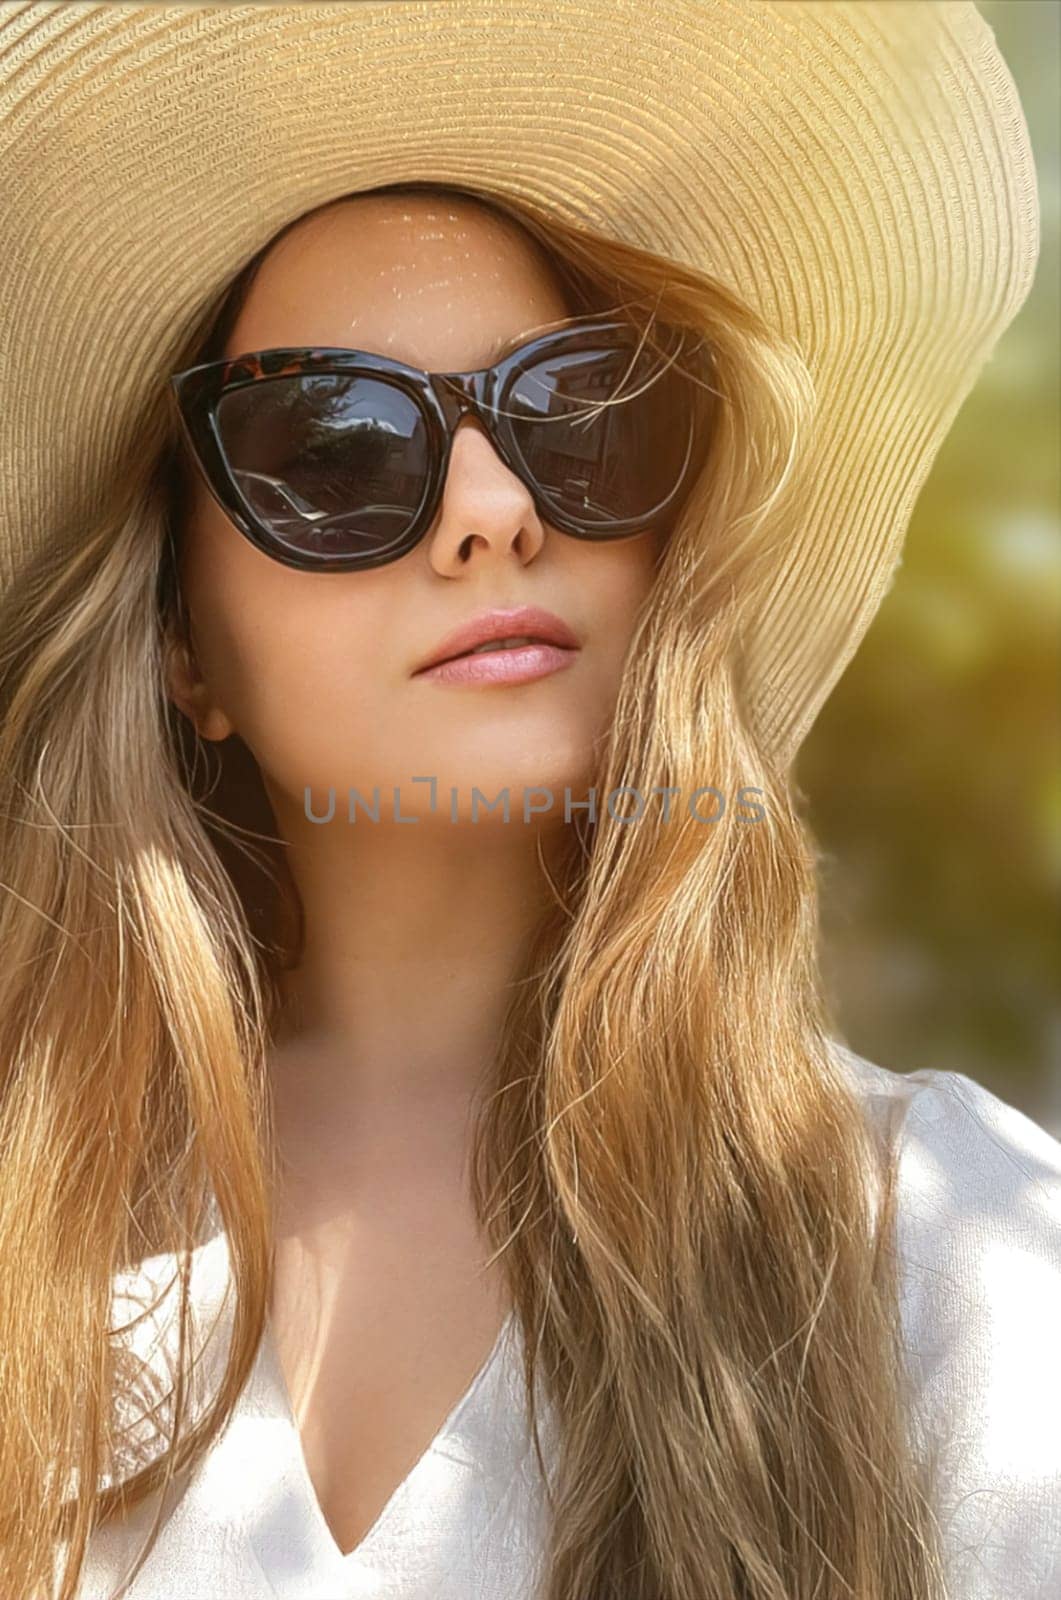 Beauty, summer holiday and fashion, face portrait of happy woman wearing hat and sunglasses, for skincare cosmetics, sunscreen spf lifestyle look by Anneleven